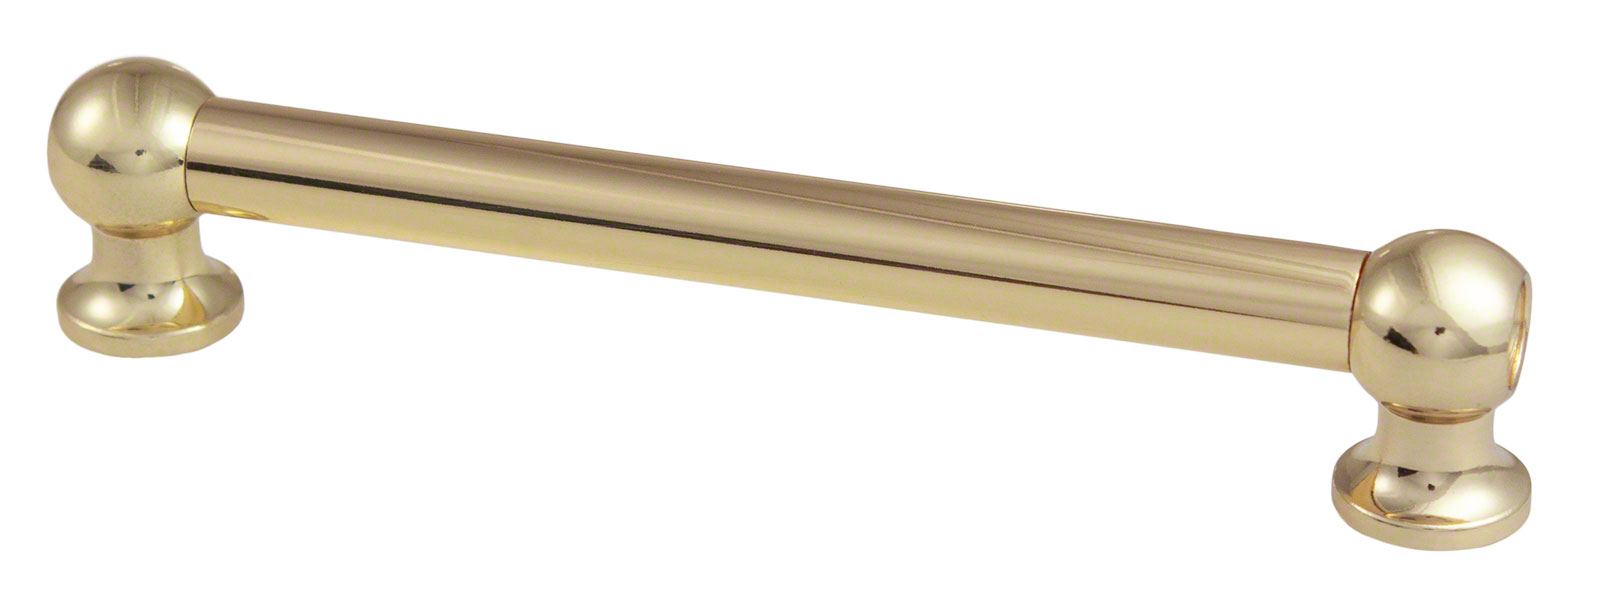 SPAREDRUM TL12D89-BR - TUBE LUG BRASS - 89MM - DOUBLE ENDED (X1)